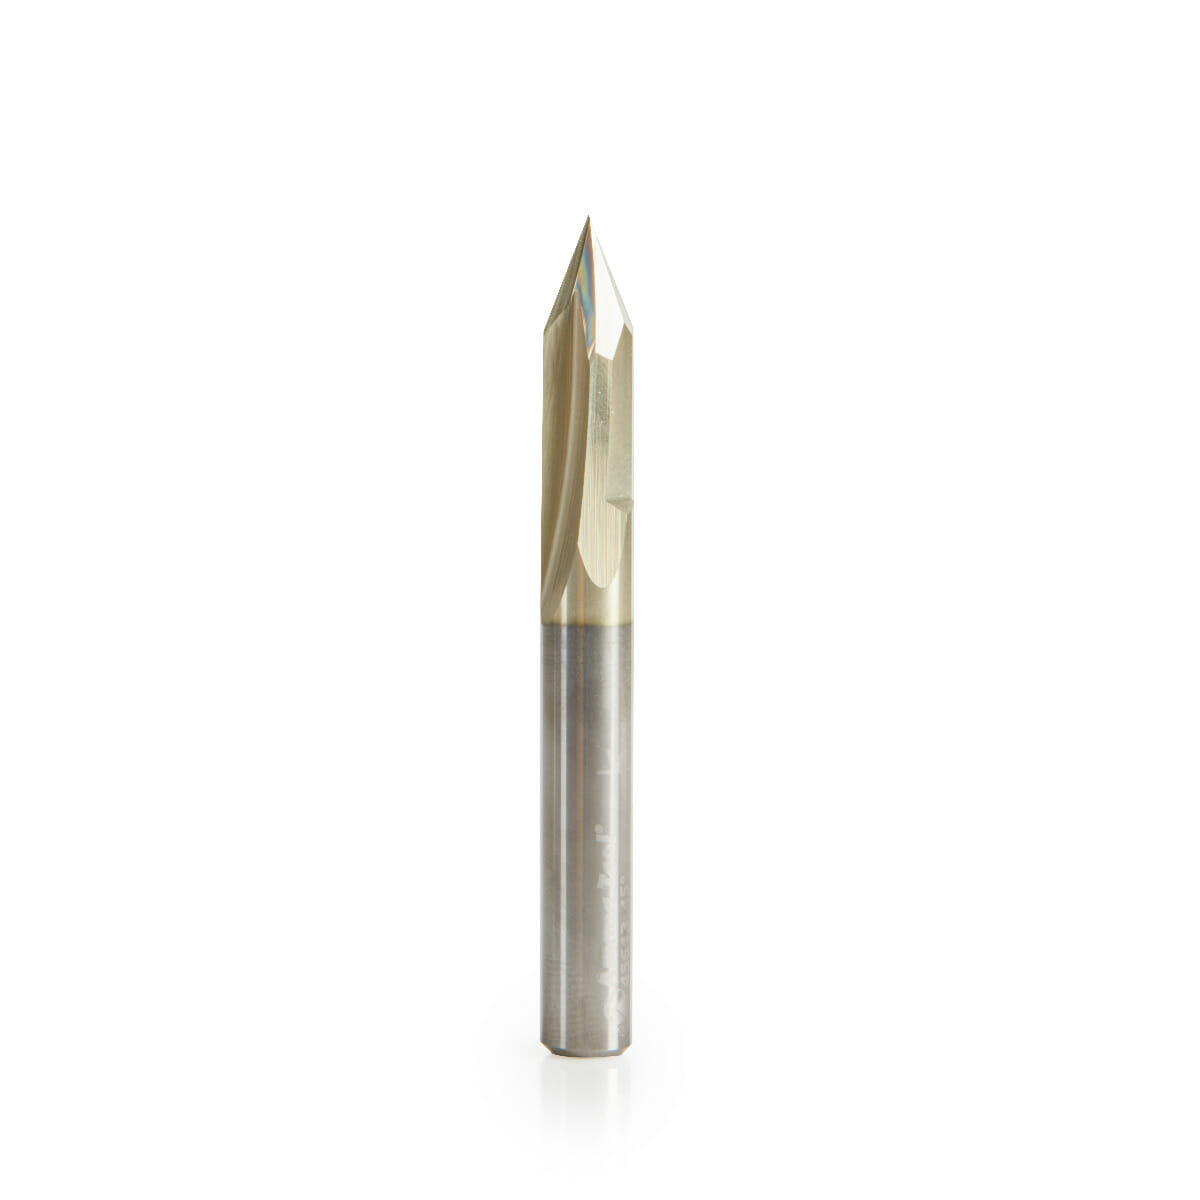 Zero-Point” 45 Degree V-Groove and Engraving 1/4 Dia x 0.310″ x 1/4 Shank ZrN Coated Router Bit